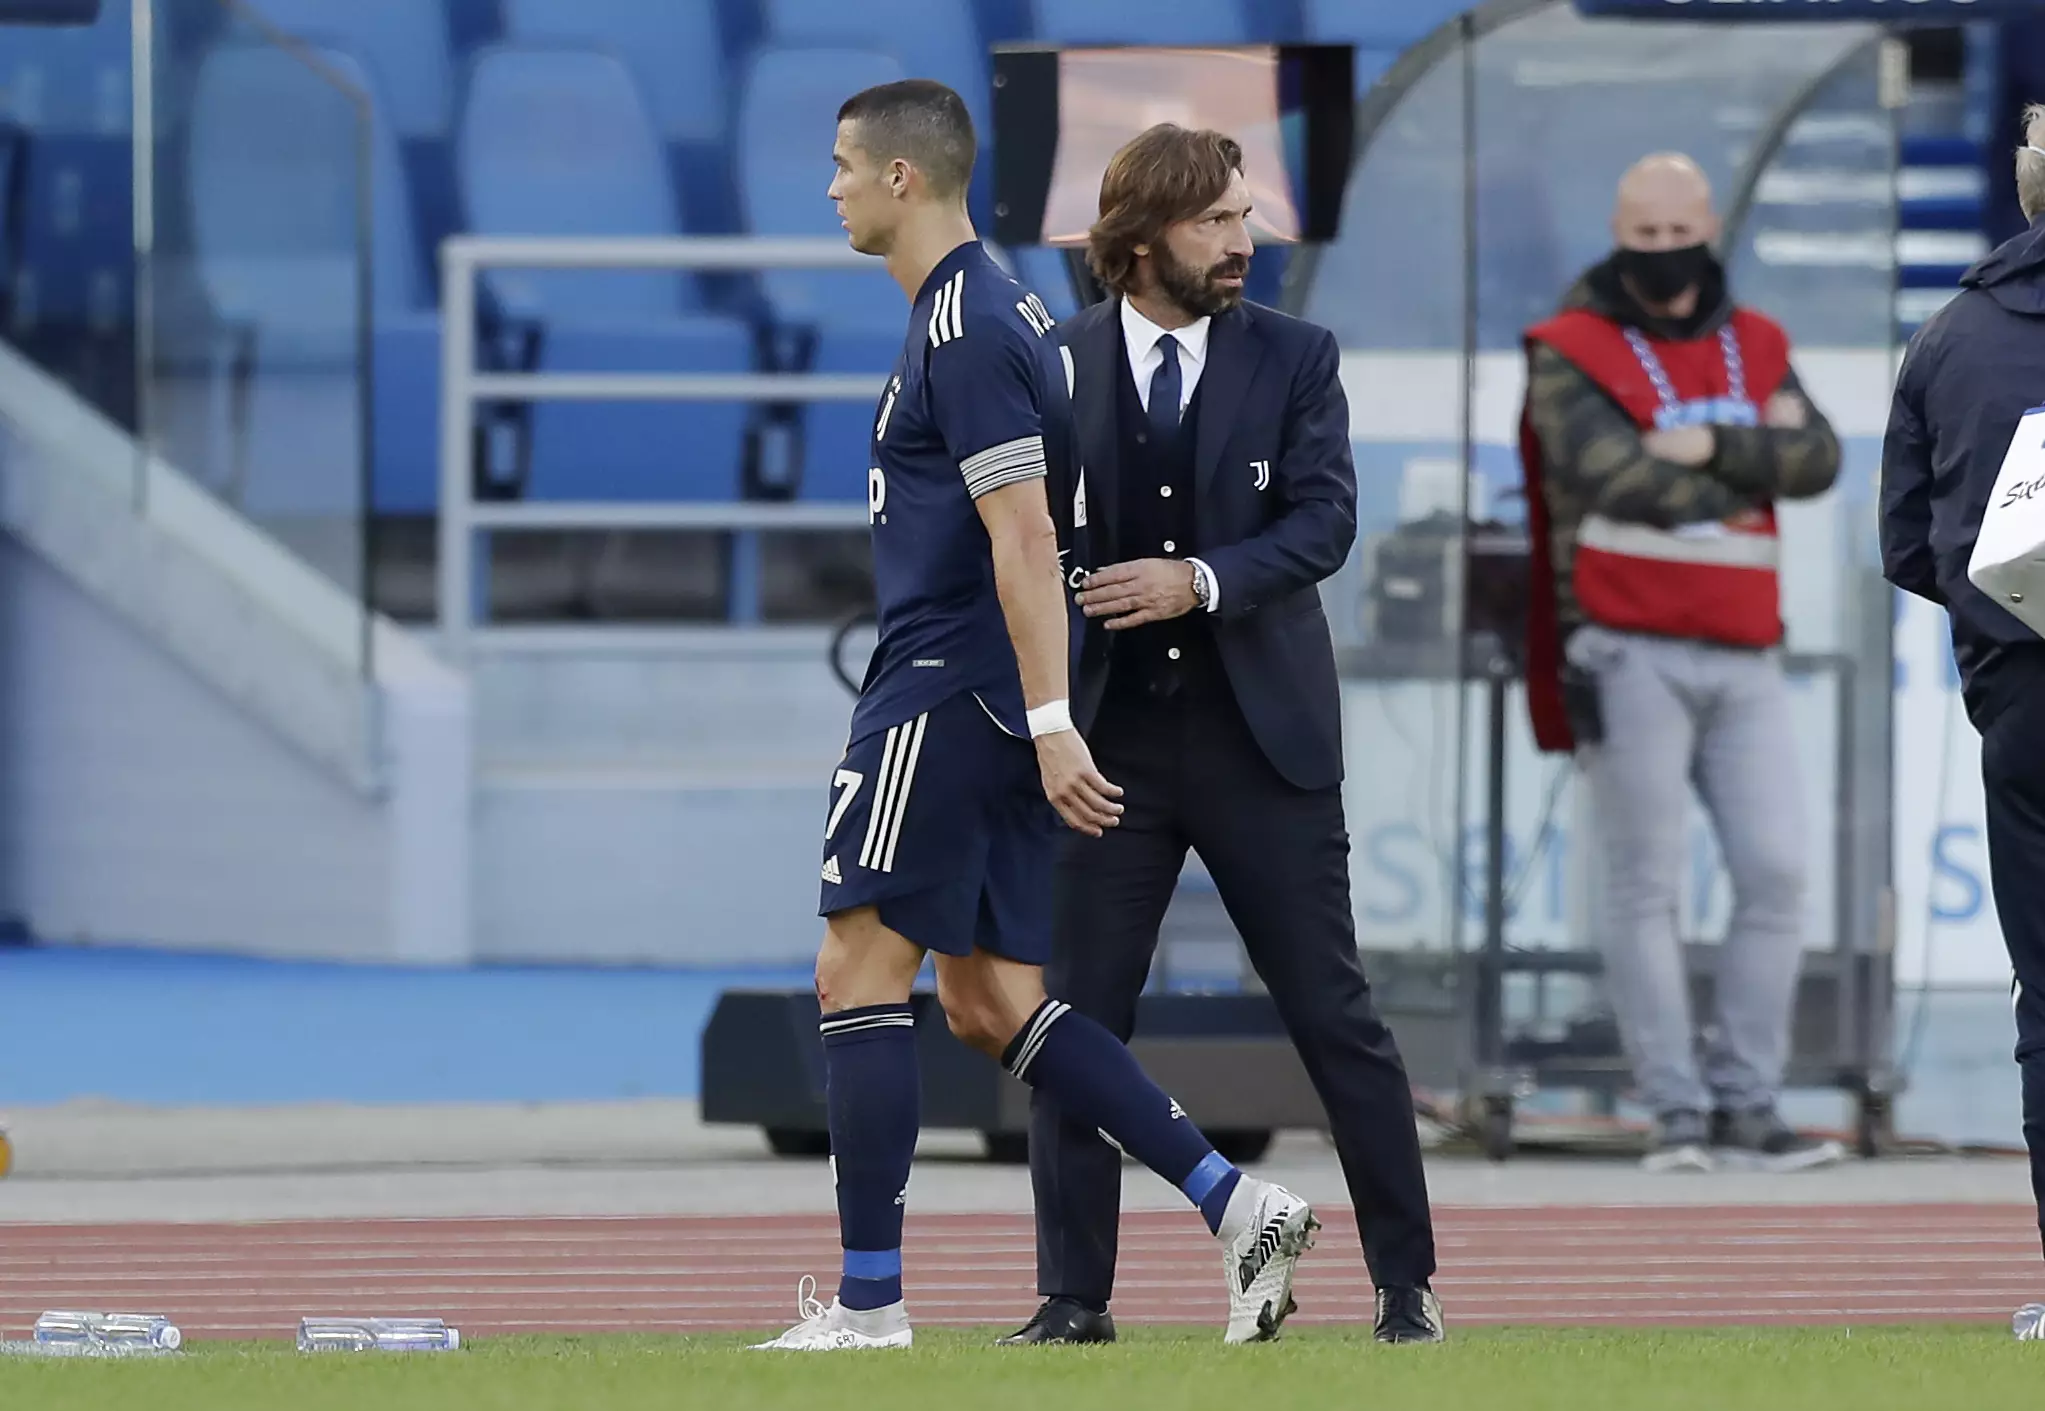 There's been on indication of a falling out with Juve head coach Andrea Pirlo.